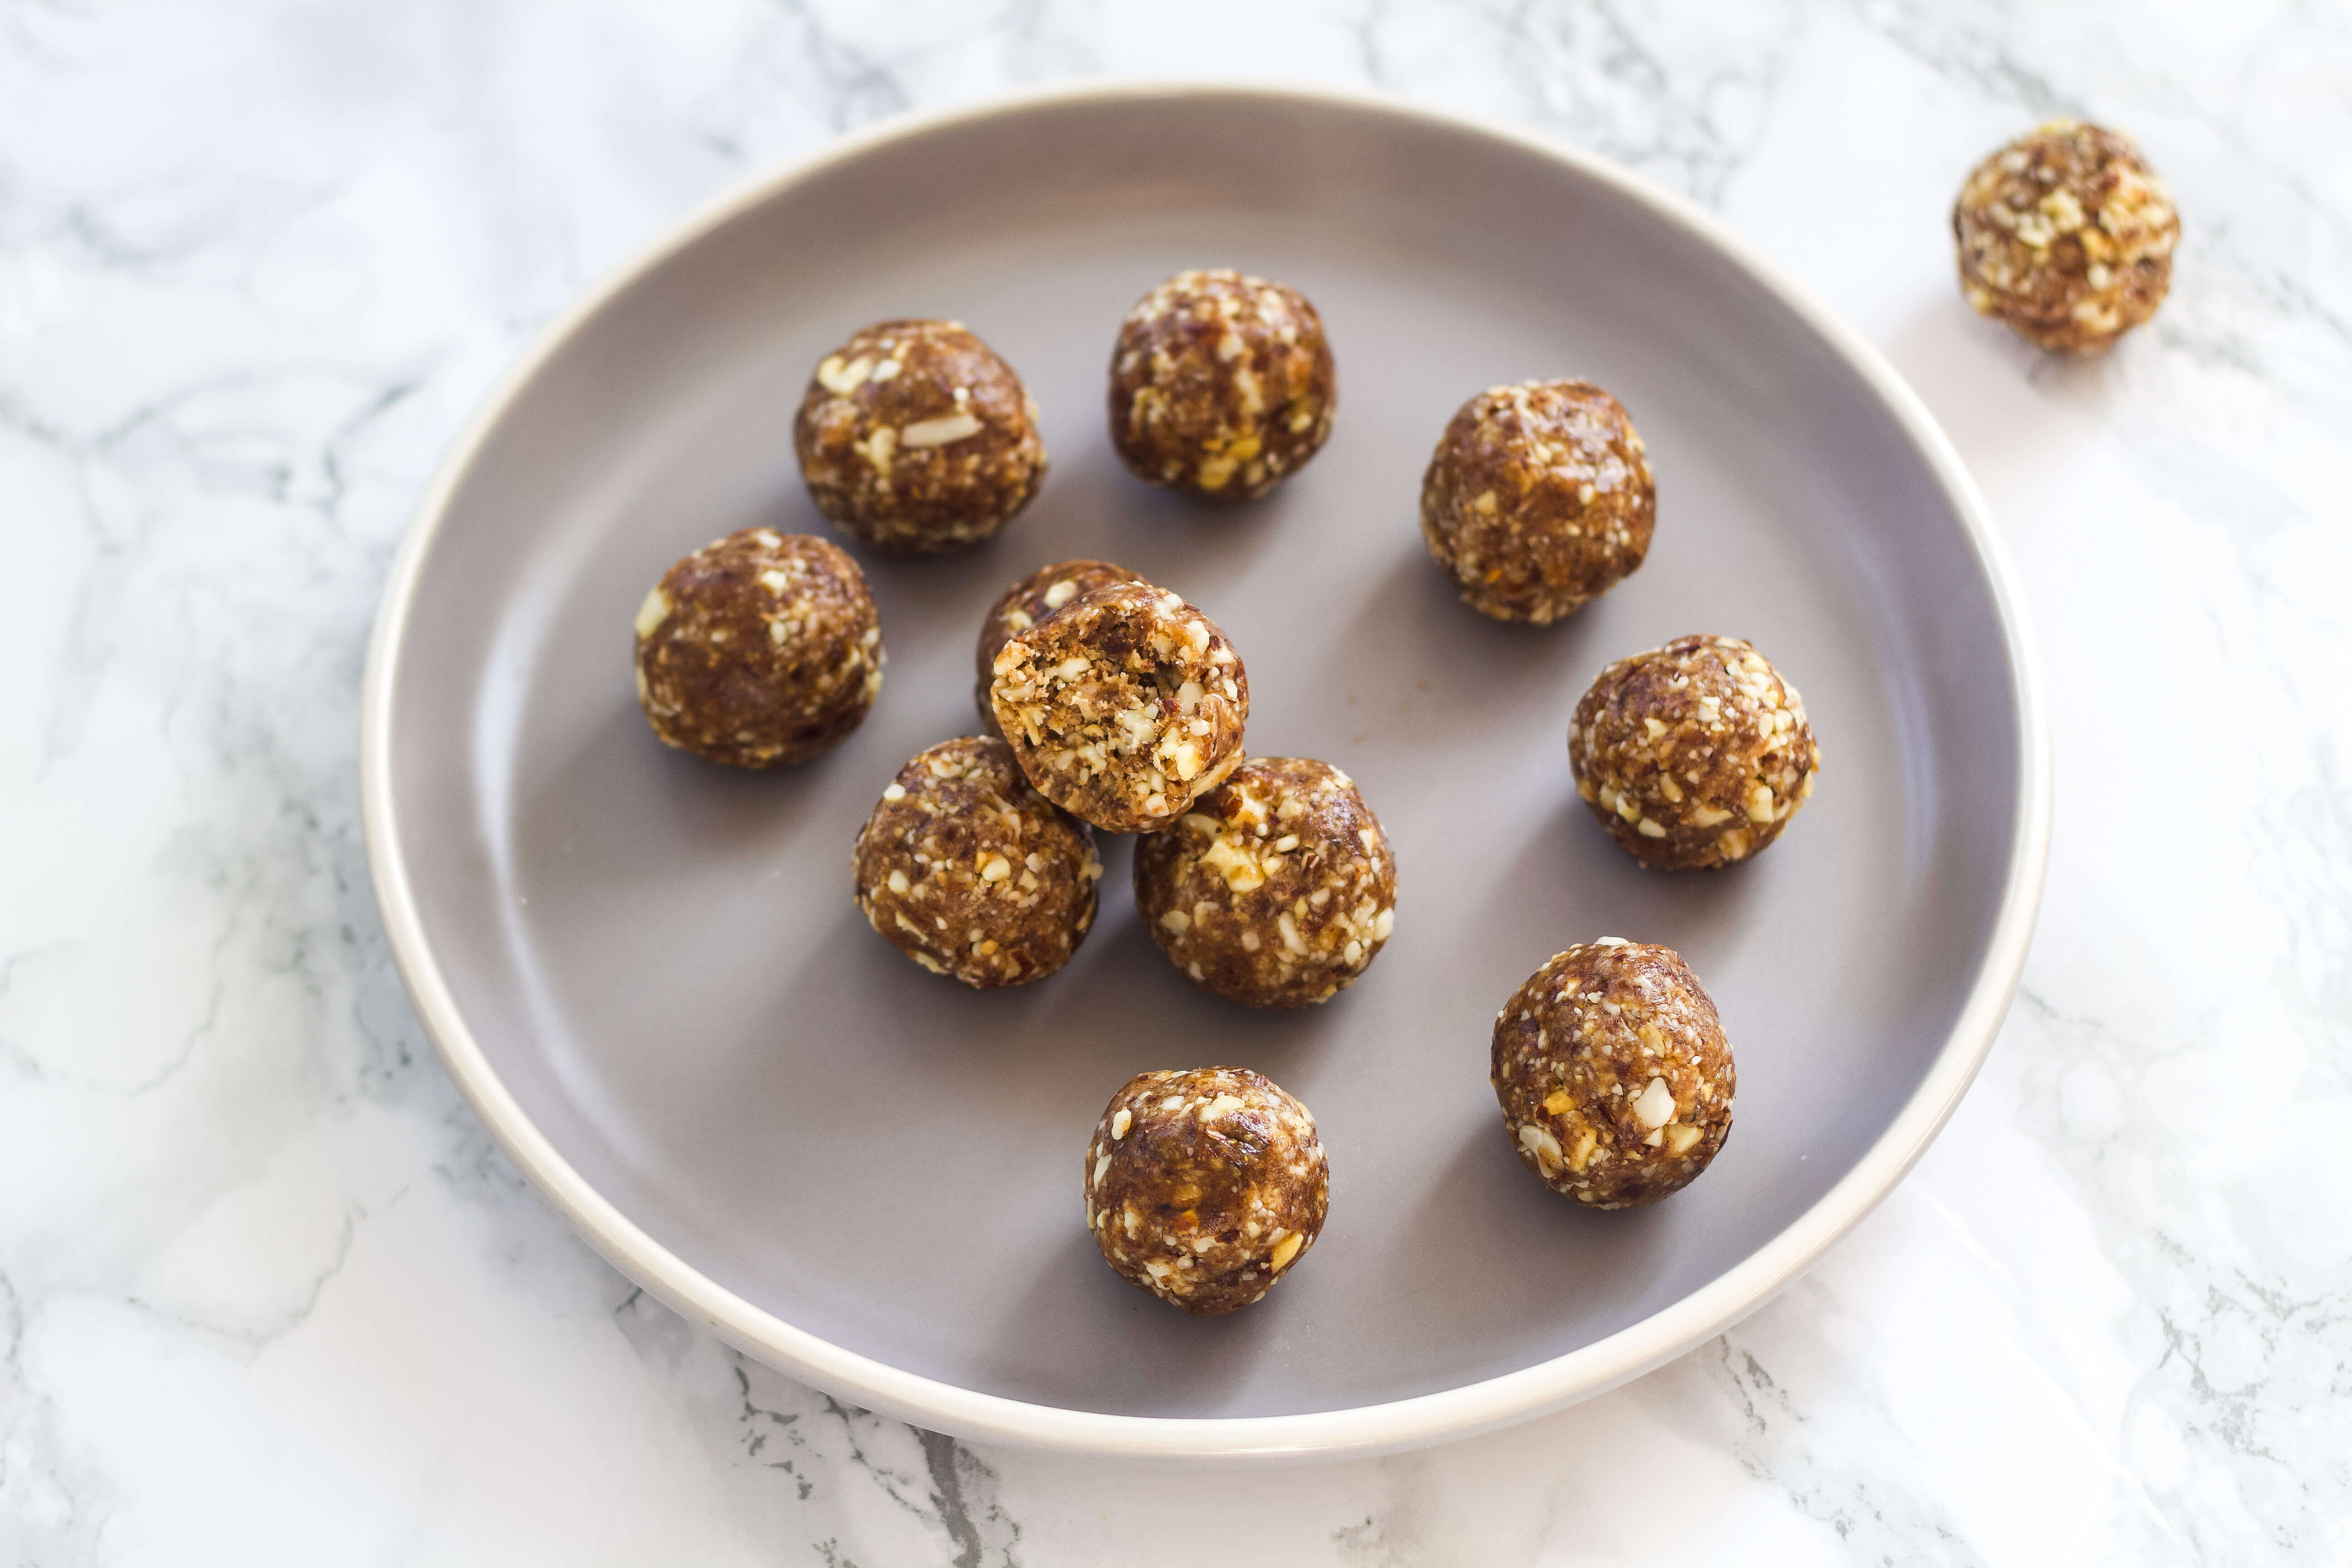 20 Specific Carbohydrate Diet Meals to Help Clients With Inflammatory Bowel Disease: Cinnamon Ginger Energy Balls